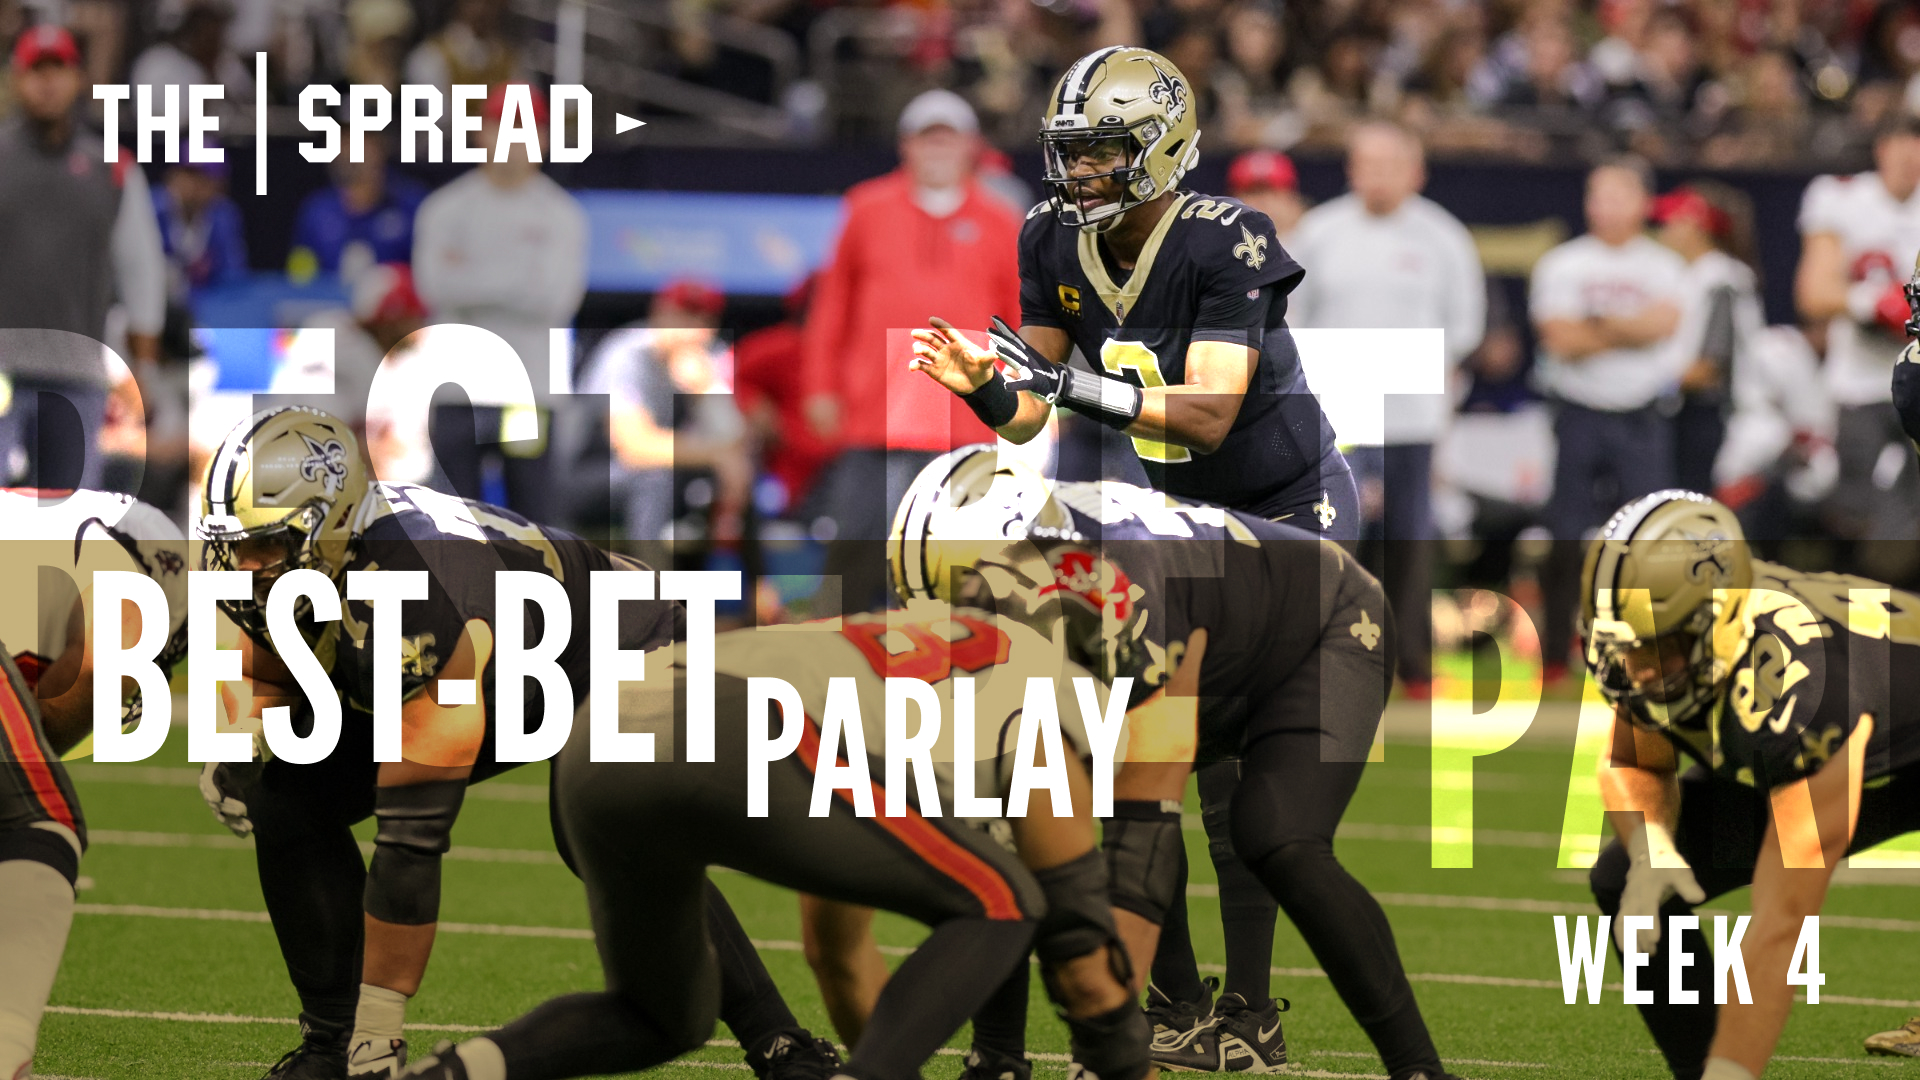 best parlays for the super bowl